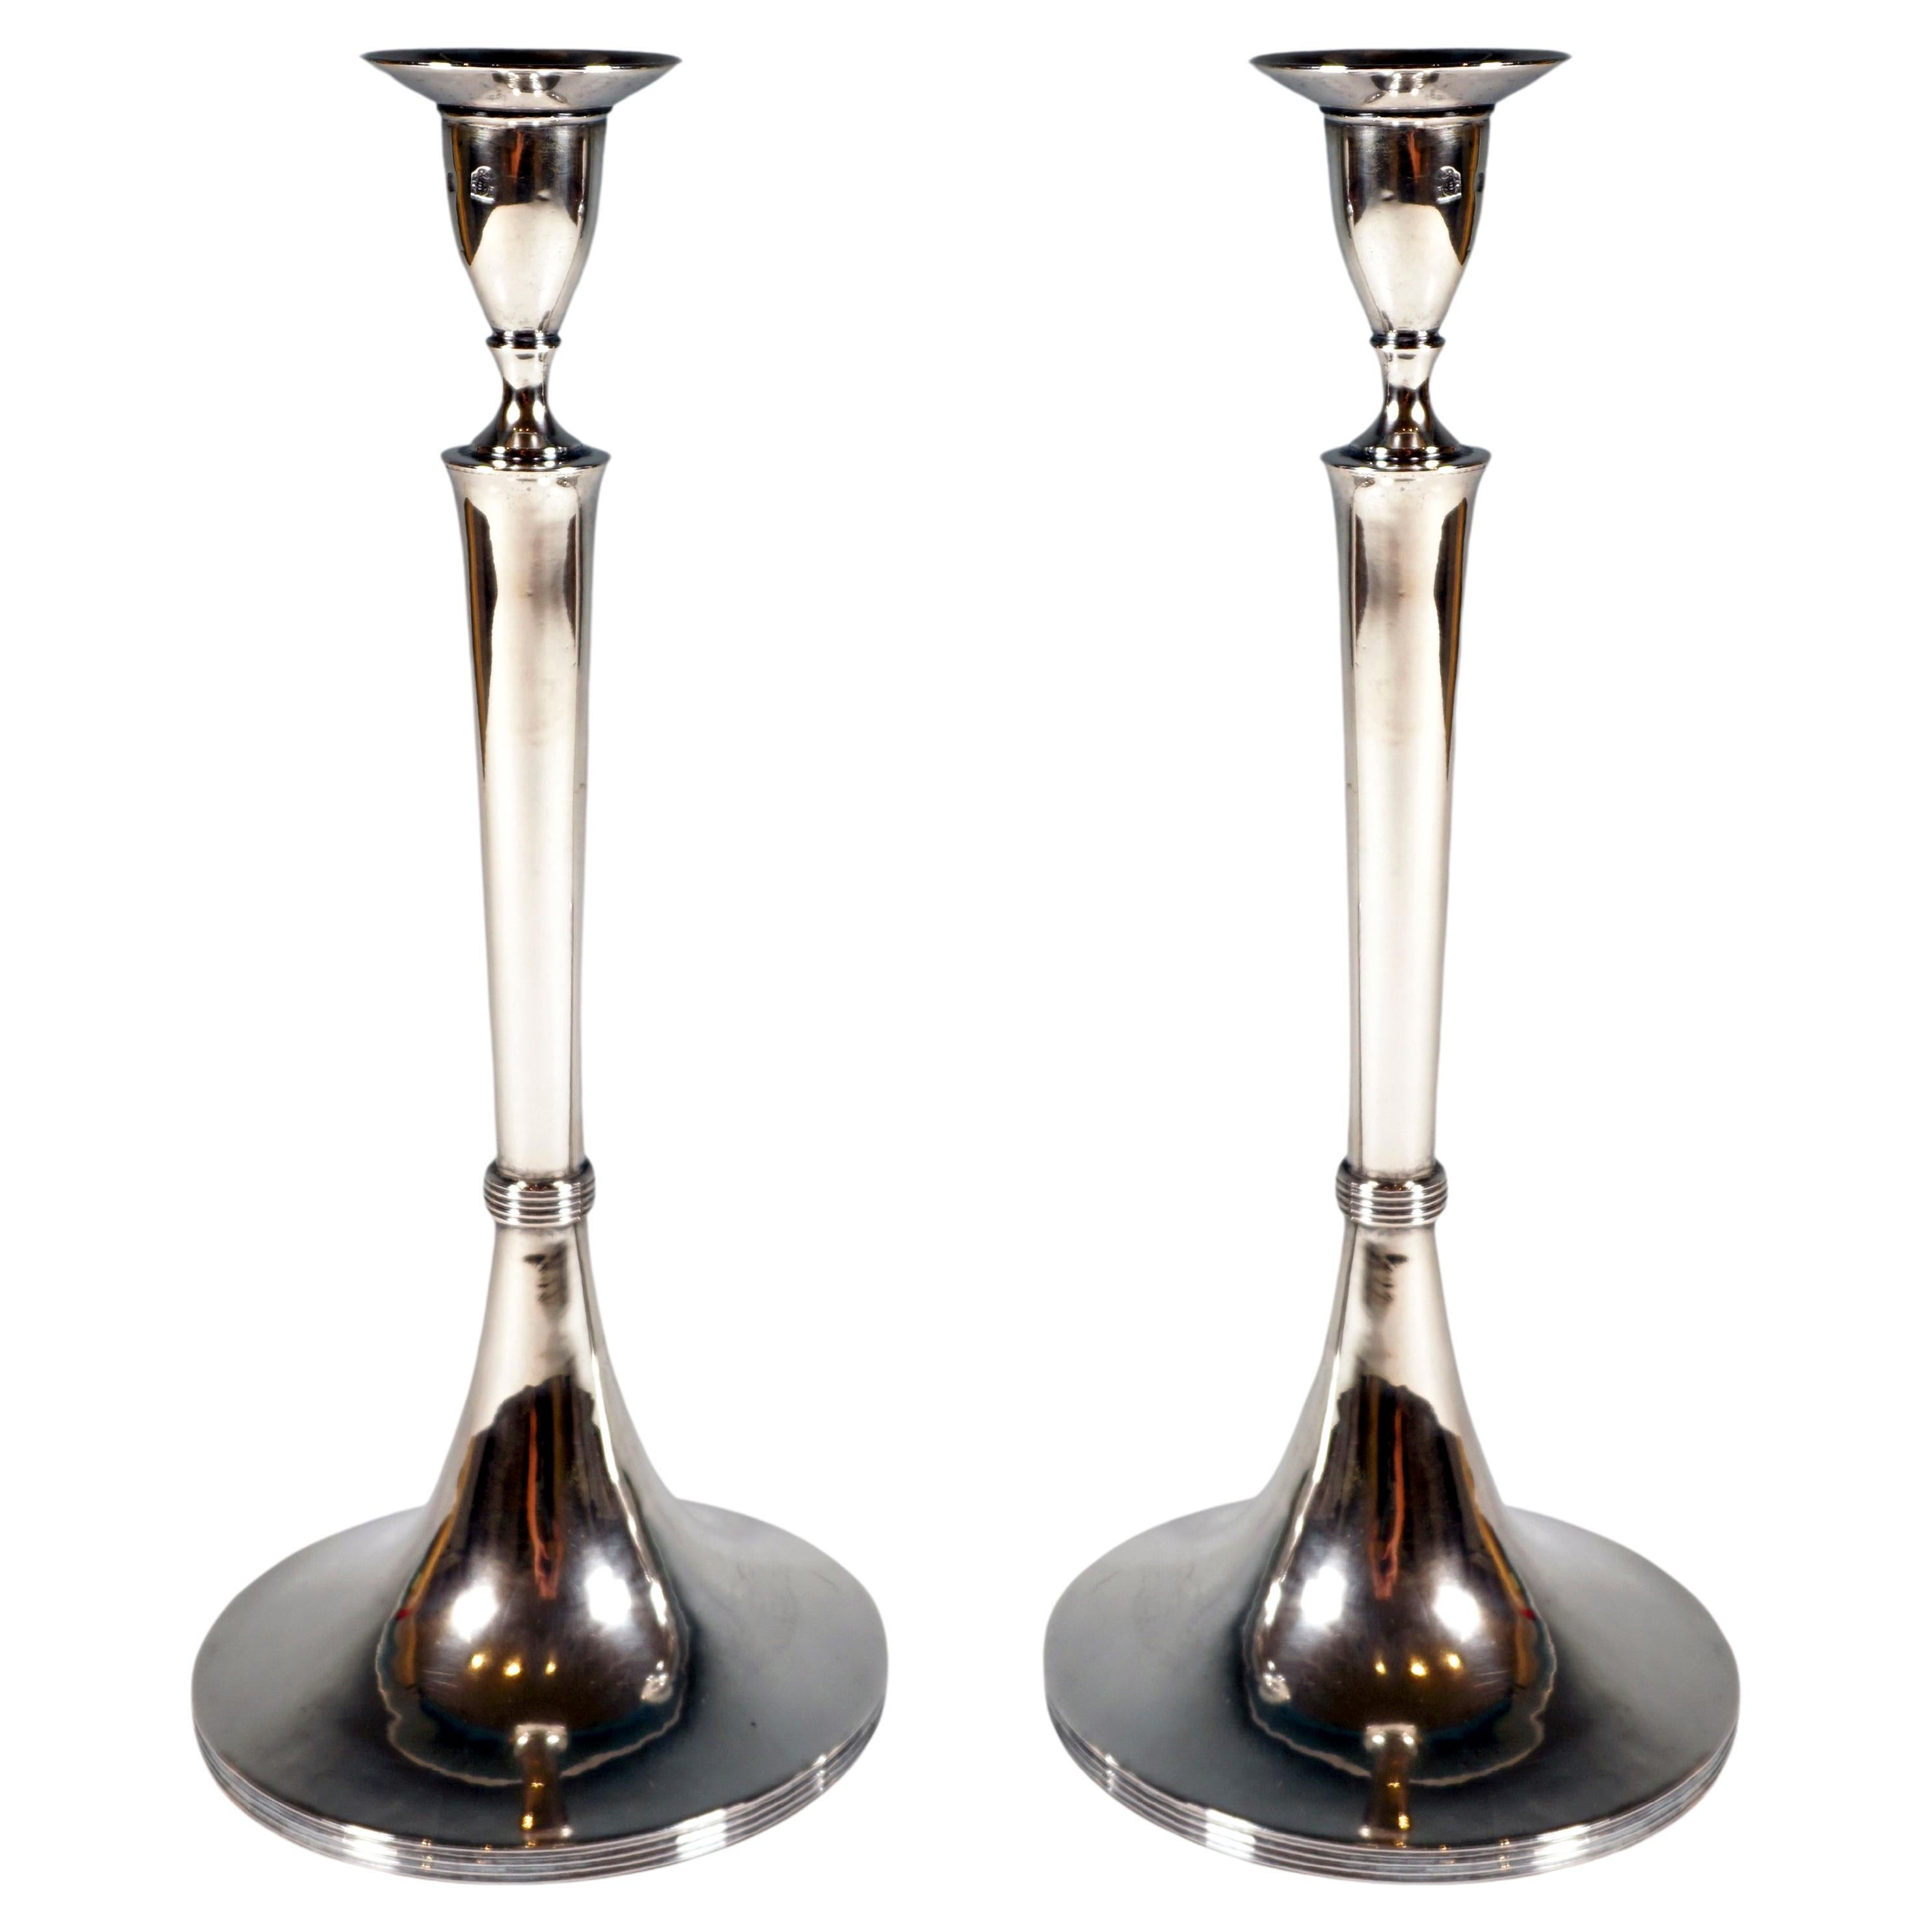 Pair Of Antique Empire Silver Candle Holders, Austria-Hungary, Dated 1821 For Sale